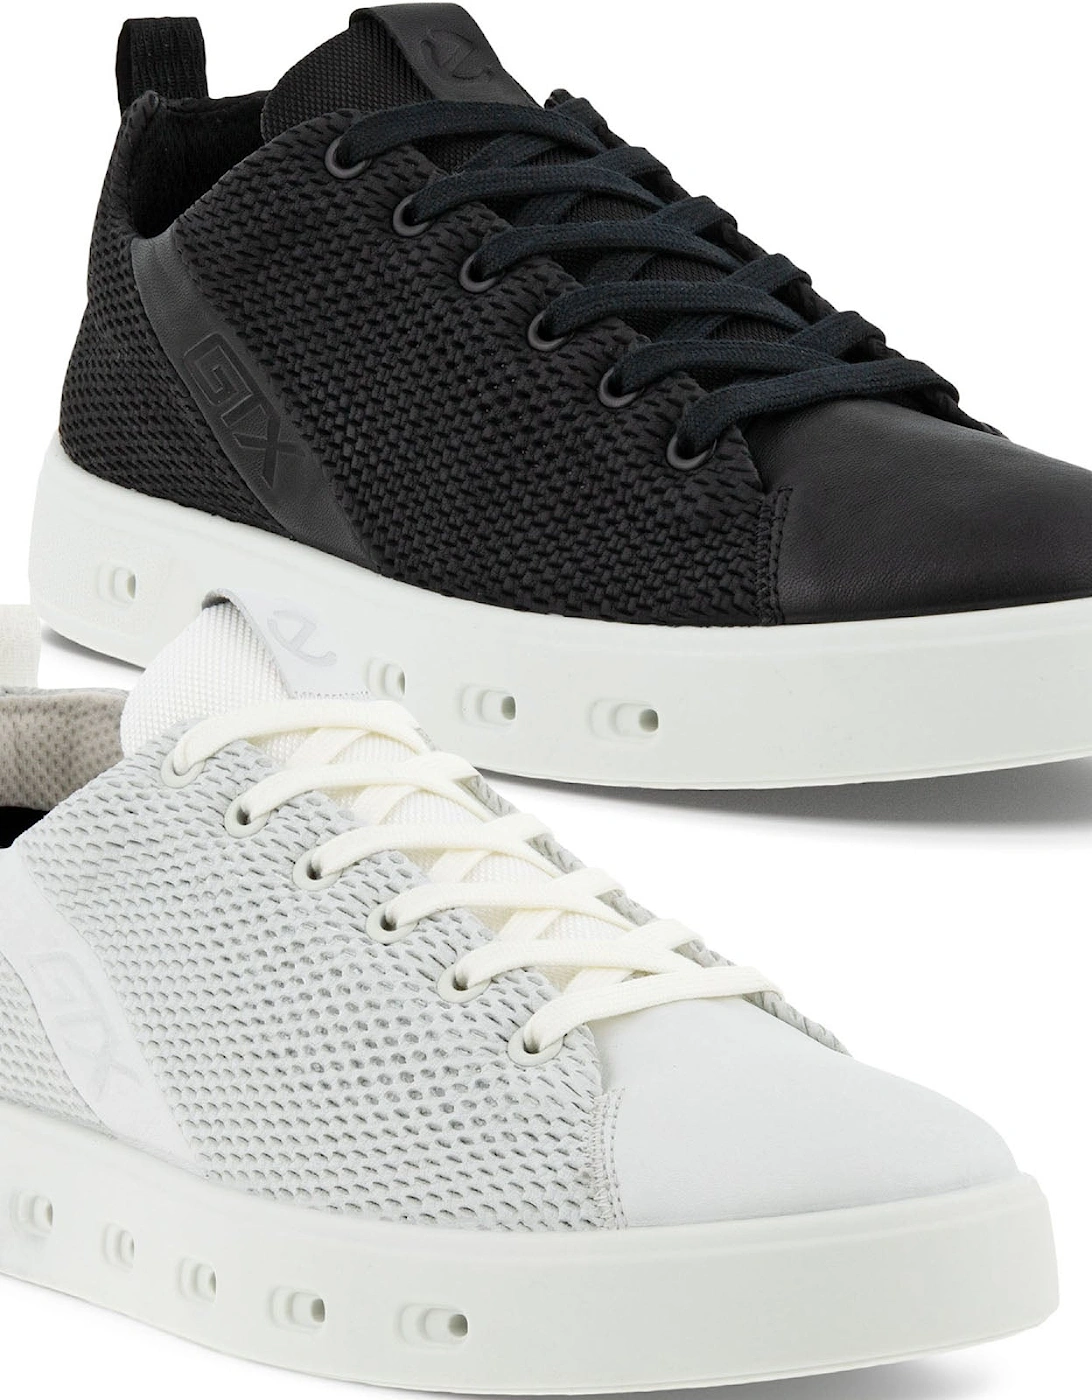 Mens Street 720 Leather Mesh GORE-TEX Trainers